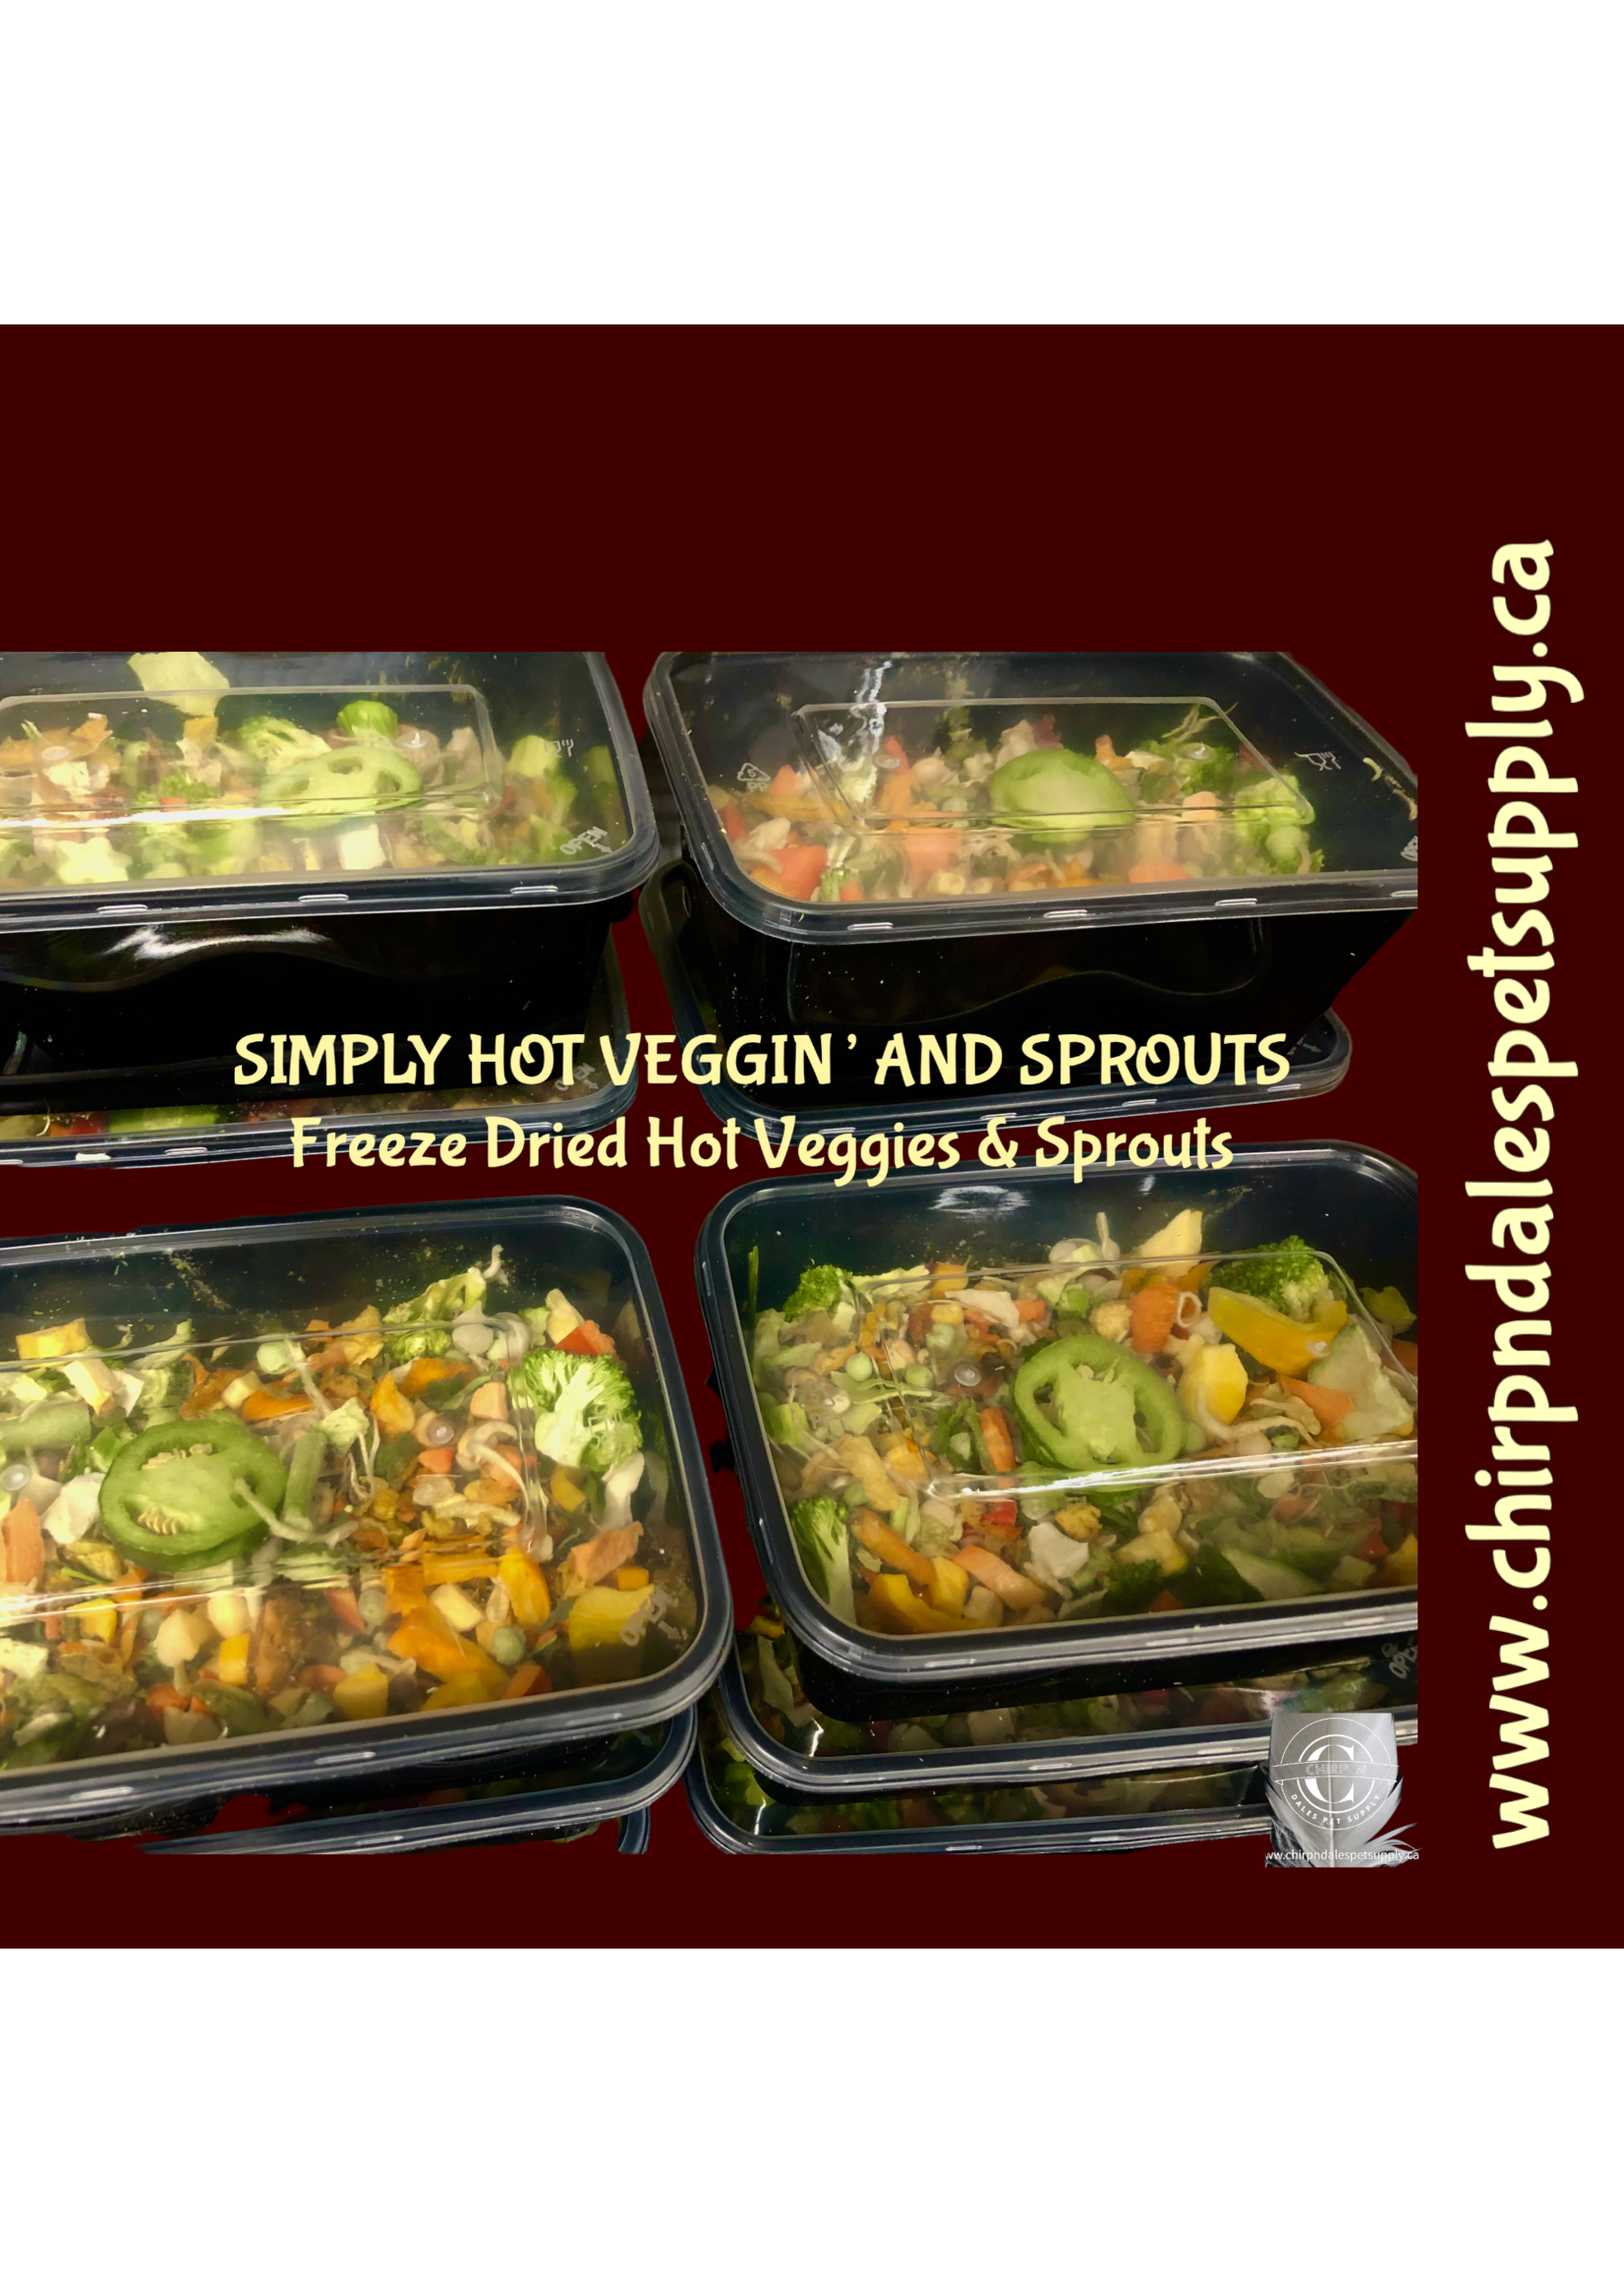 CND Freeze Dried Products Simply Hot Veggin’ Freeze Dried Hot Veggies and Sprouts